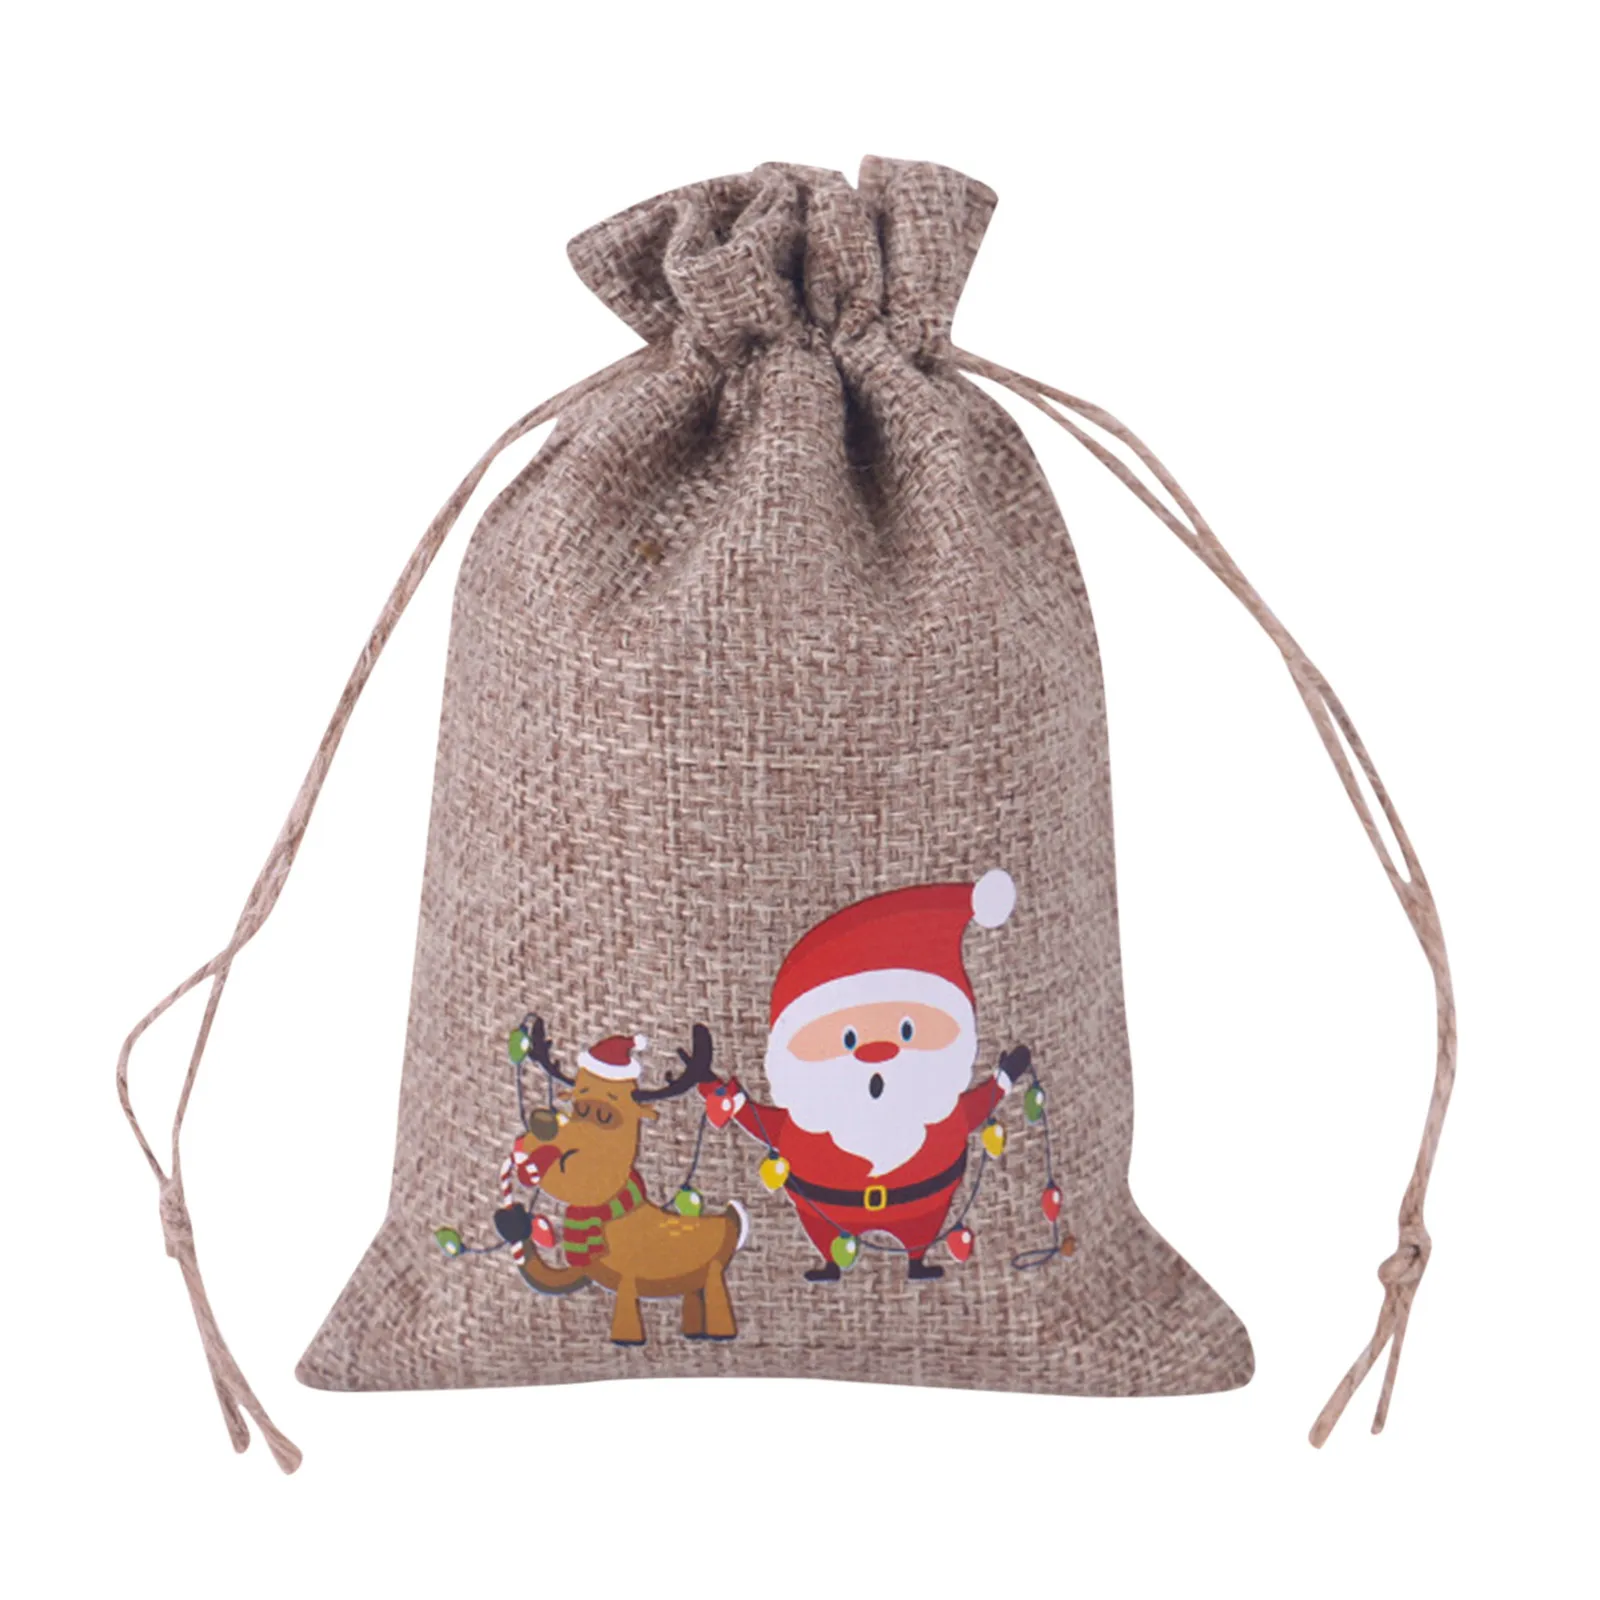 DIYASY 12pcs Christmas Burlap Jute Gift Bags with Drawstring Candy Pouch Bags x 